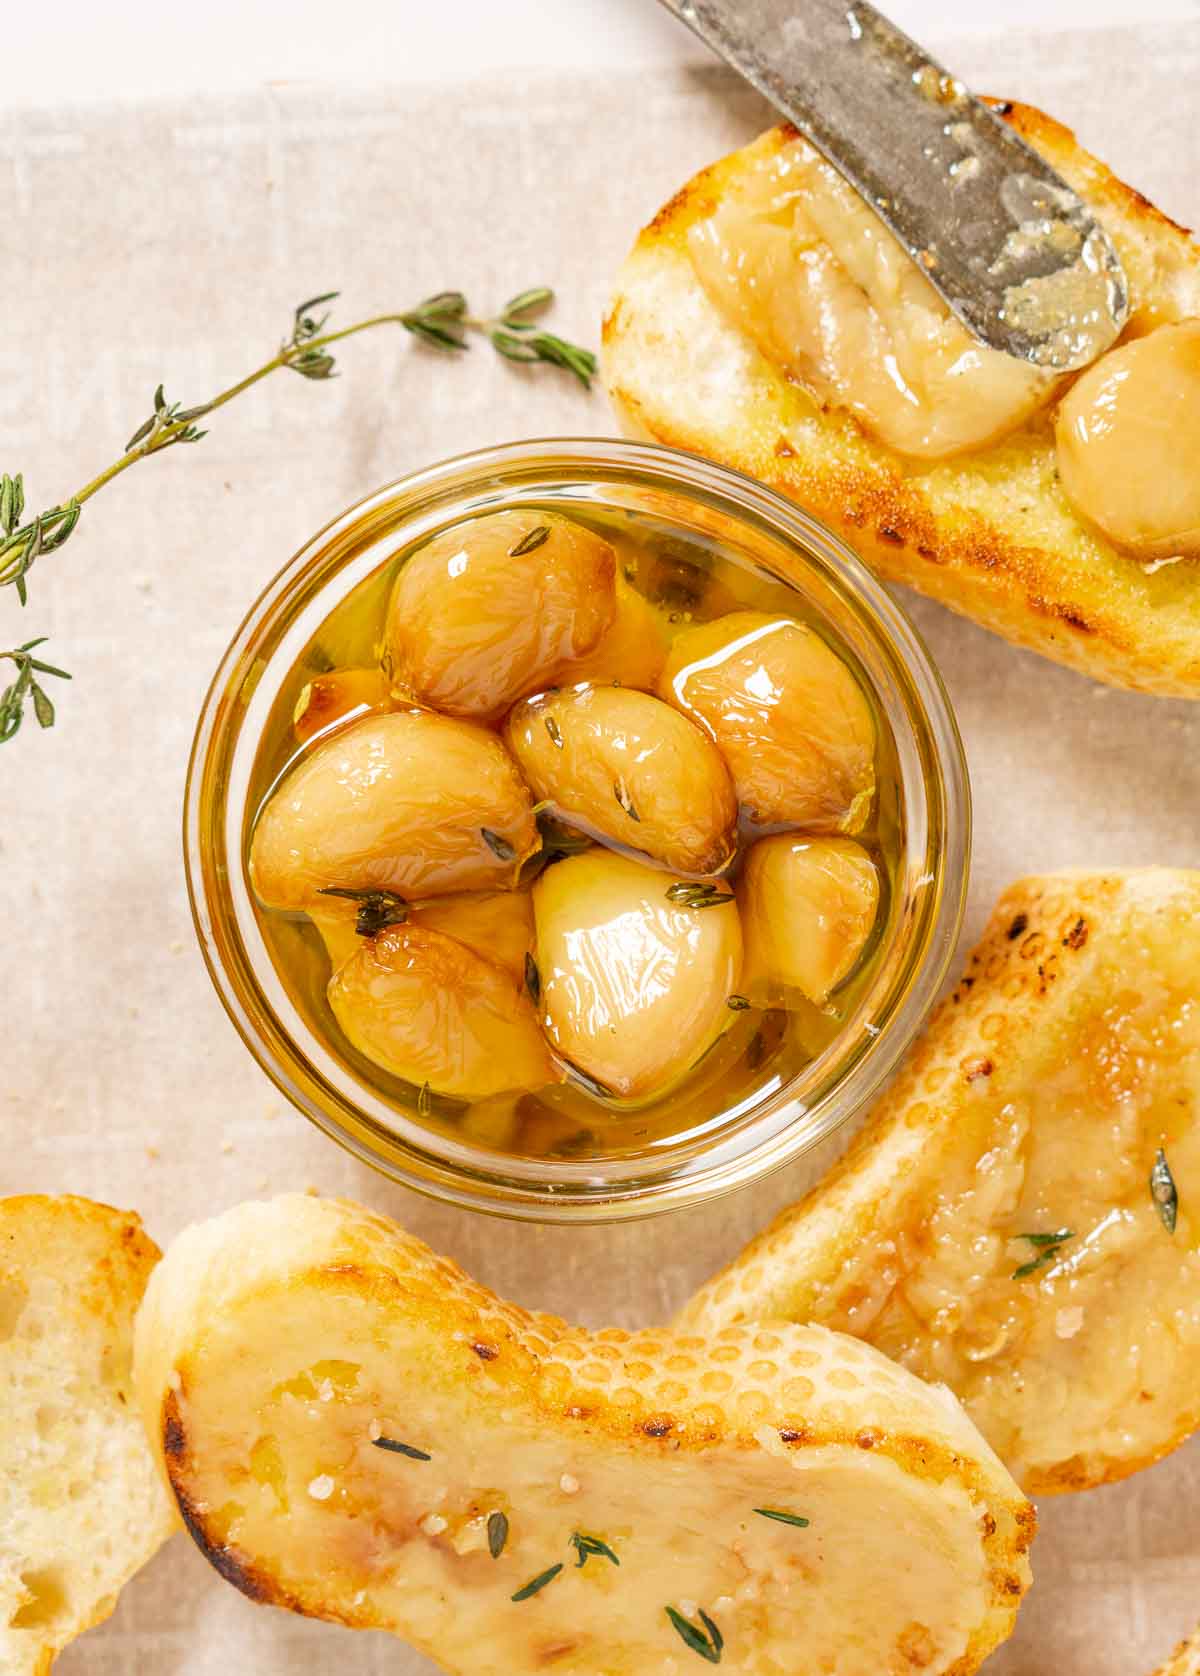 Bowl of roasted garlic confit surrounded by crostini with roasted garlic spread on them